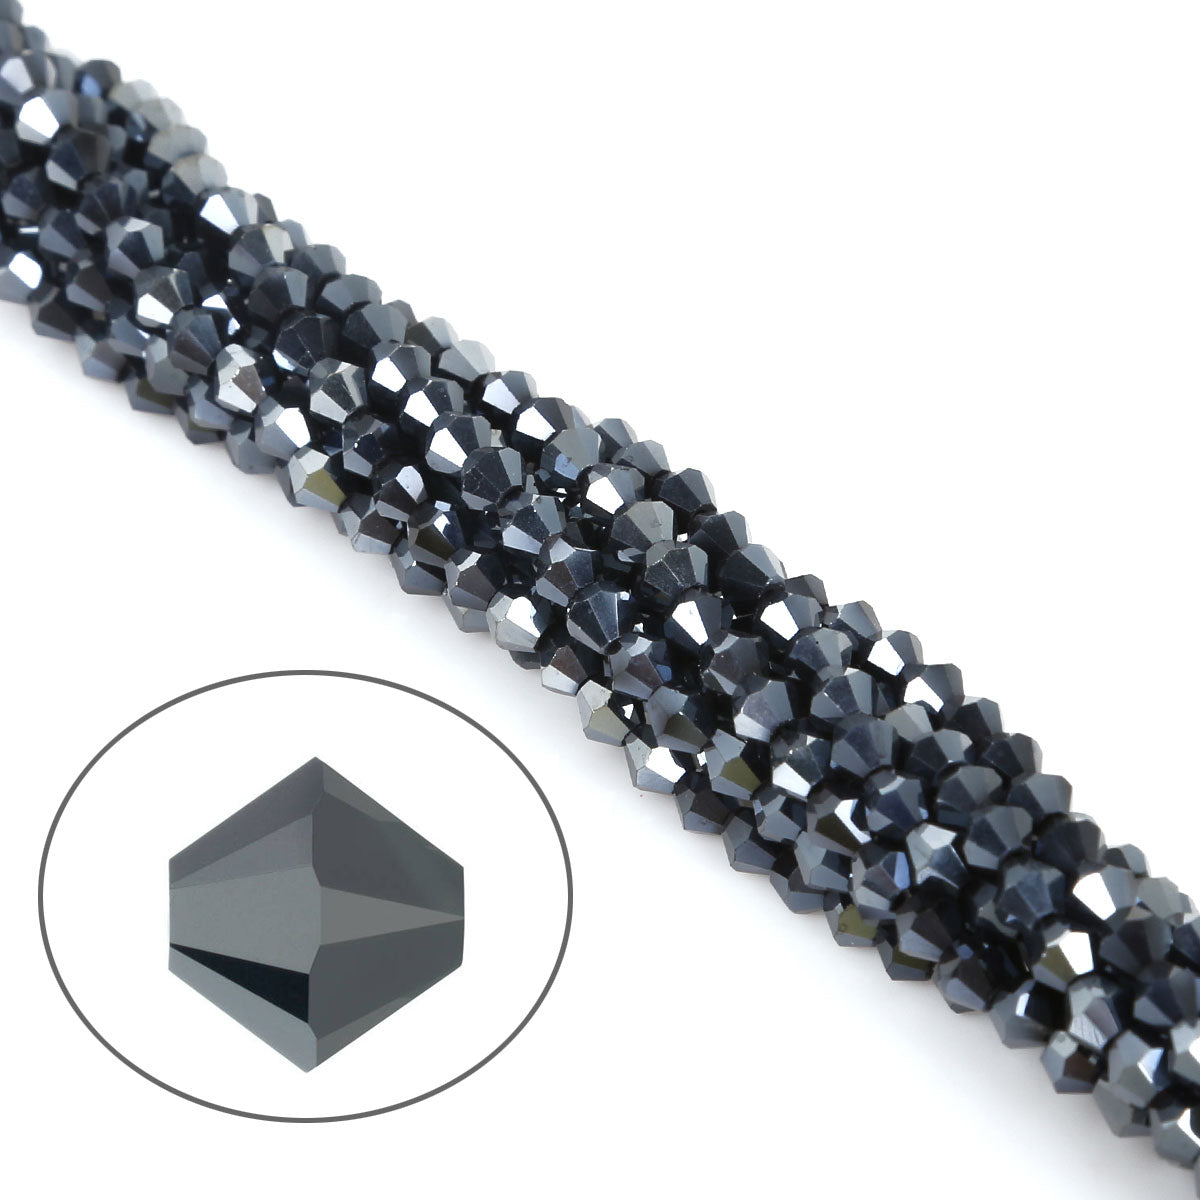 576 Pcs Beads Black Hematite Crystal AB glass beads 4mm for jewelry making